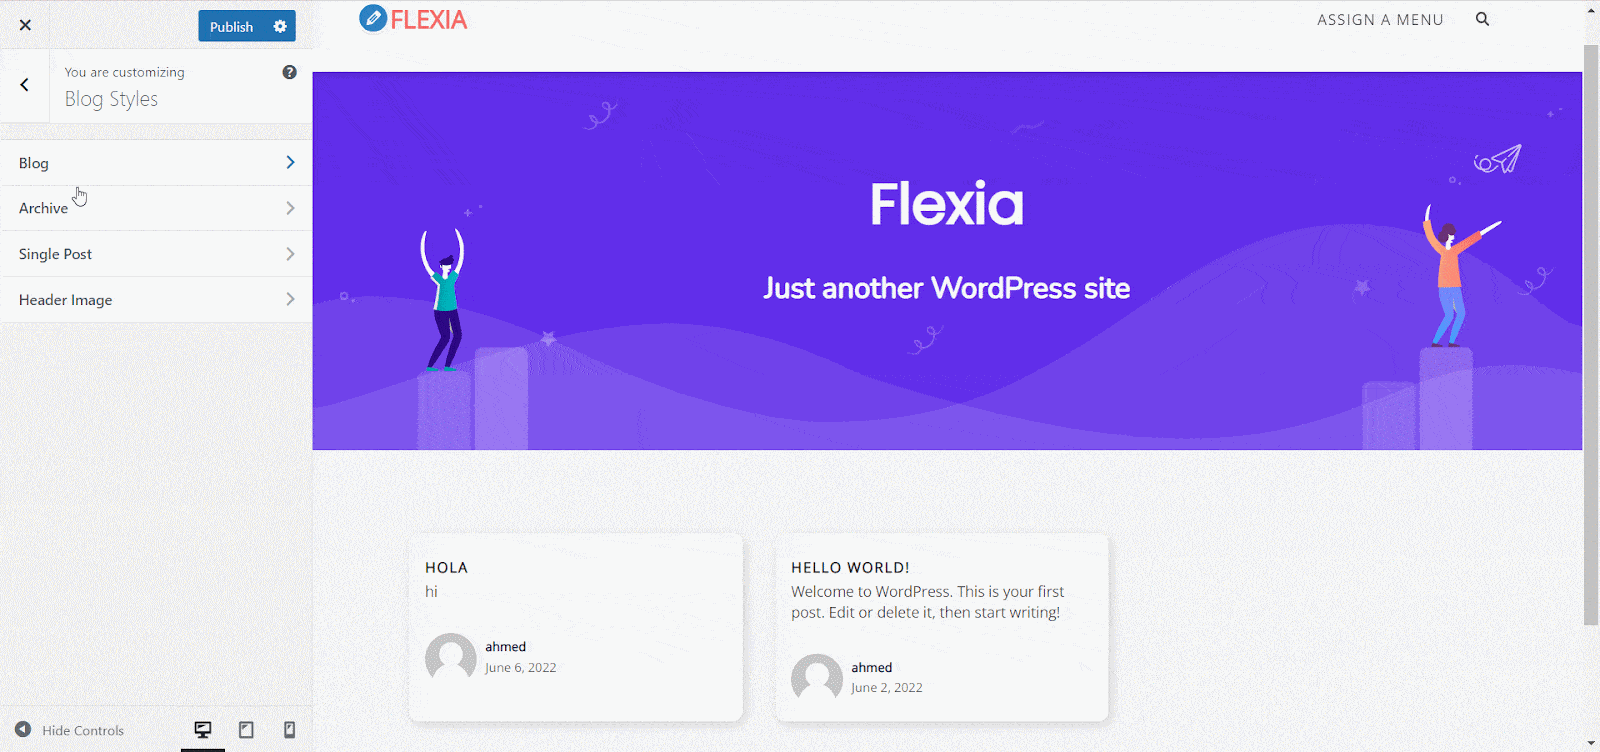 BLOG PAGE IN FLEXIA